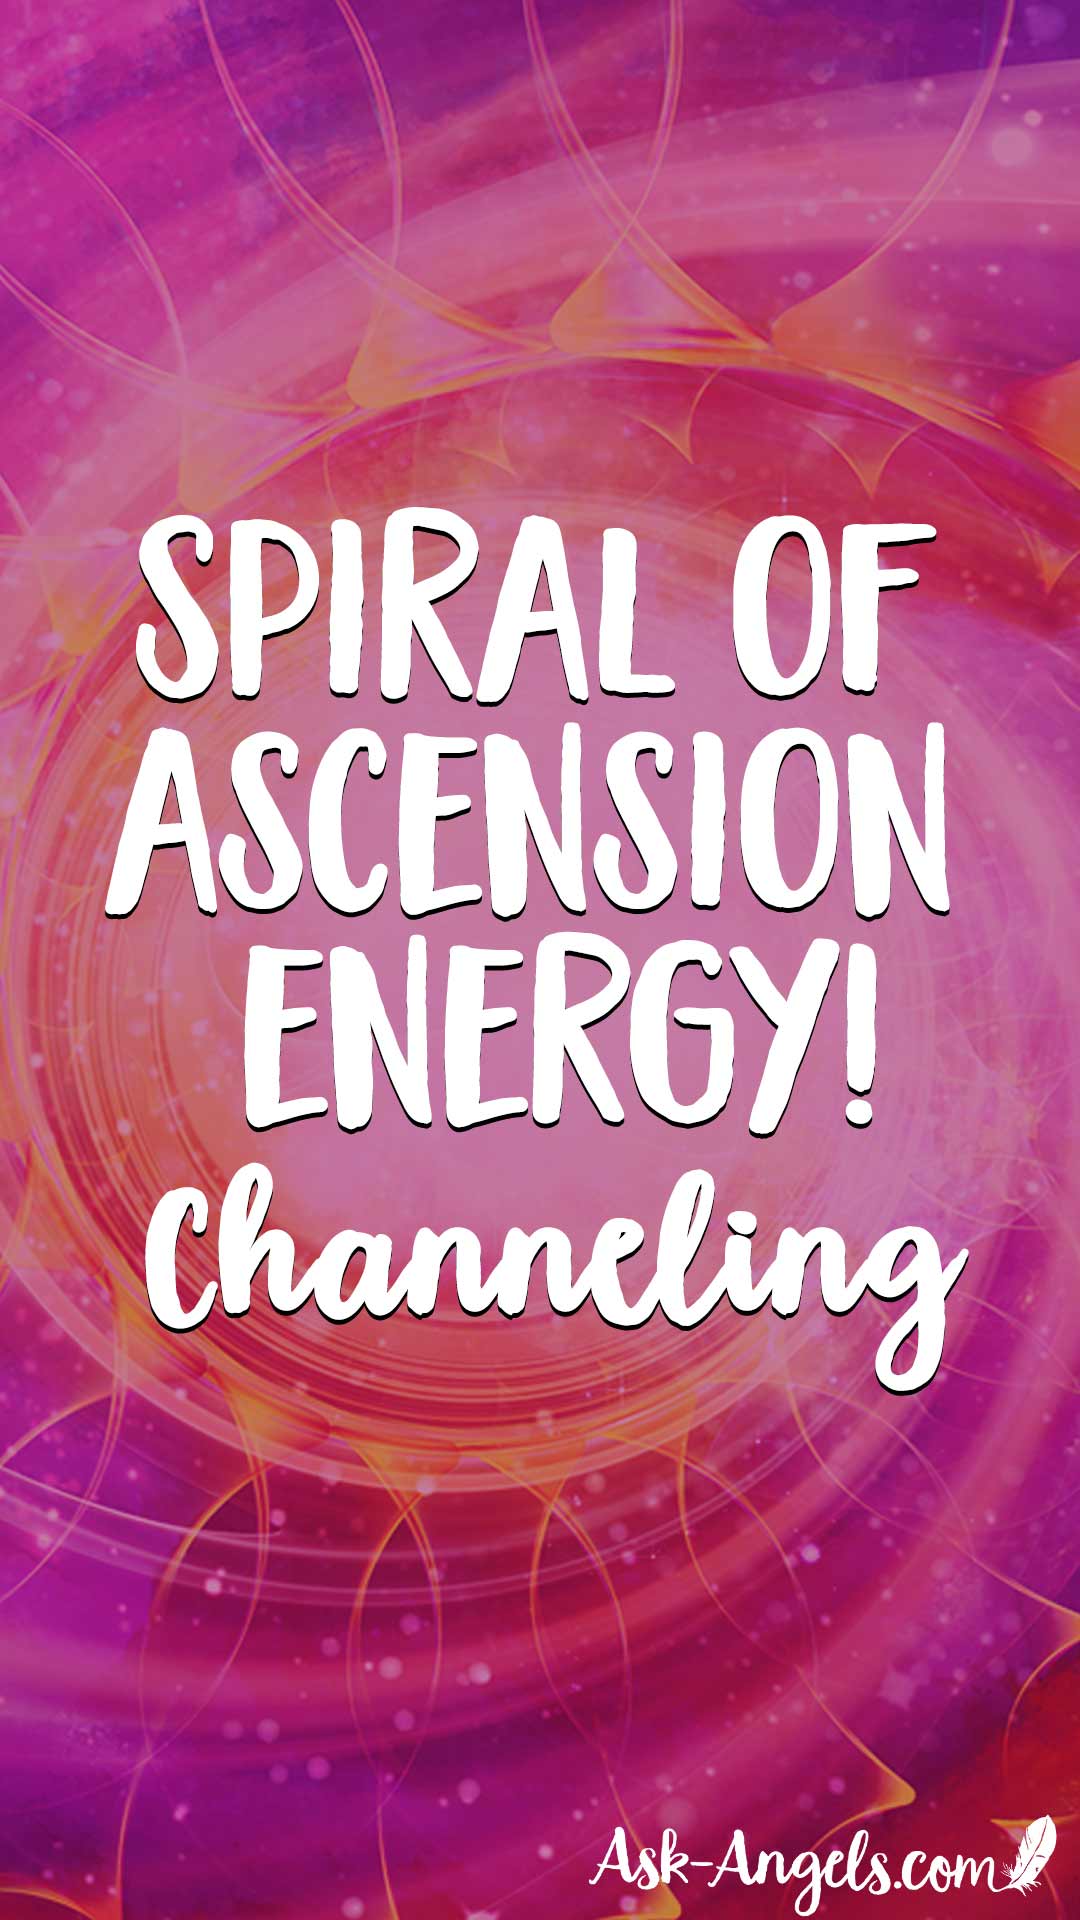 The Event - Spiral of Ascension Energy channeling with the Ascension Council of Light by Melanie Beckler